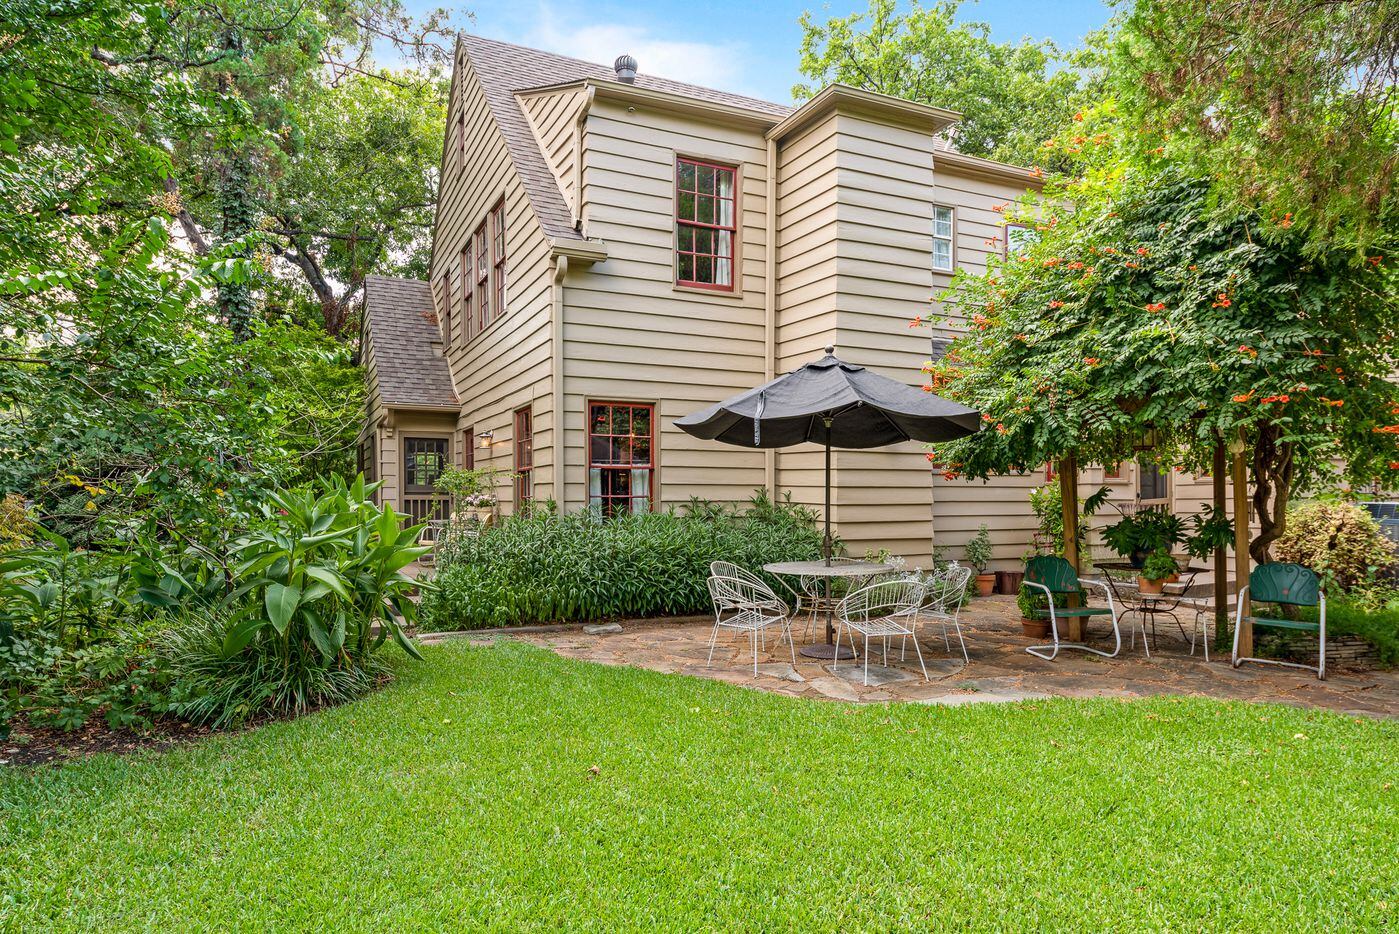 A look at 616 Blaylock Drive in Dallas, one of the houses on the 2019 Heritage Oak Cliff...